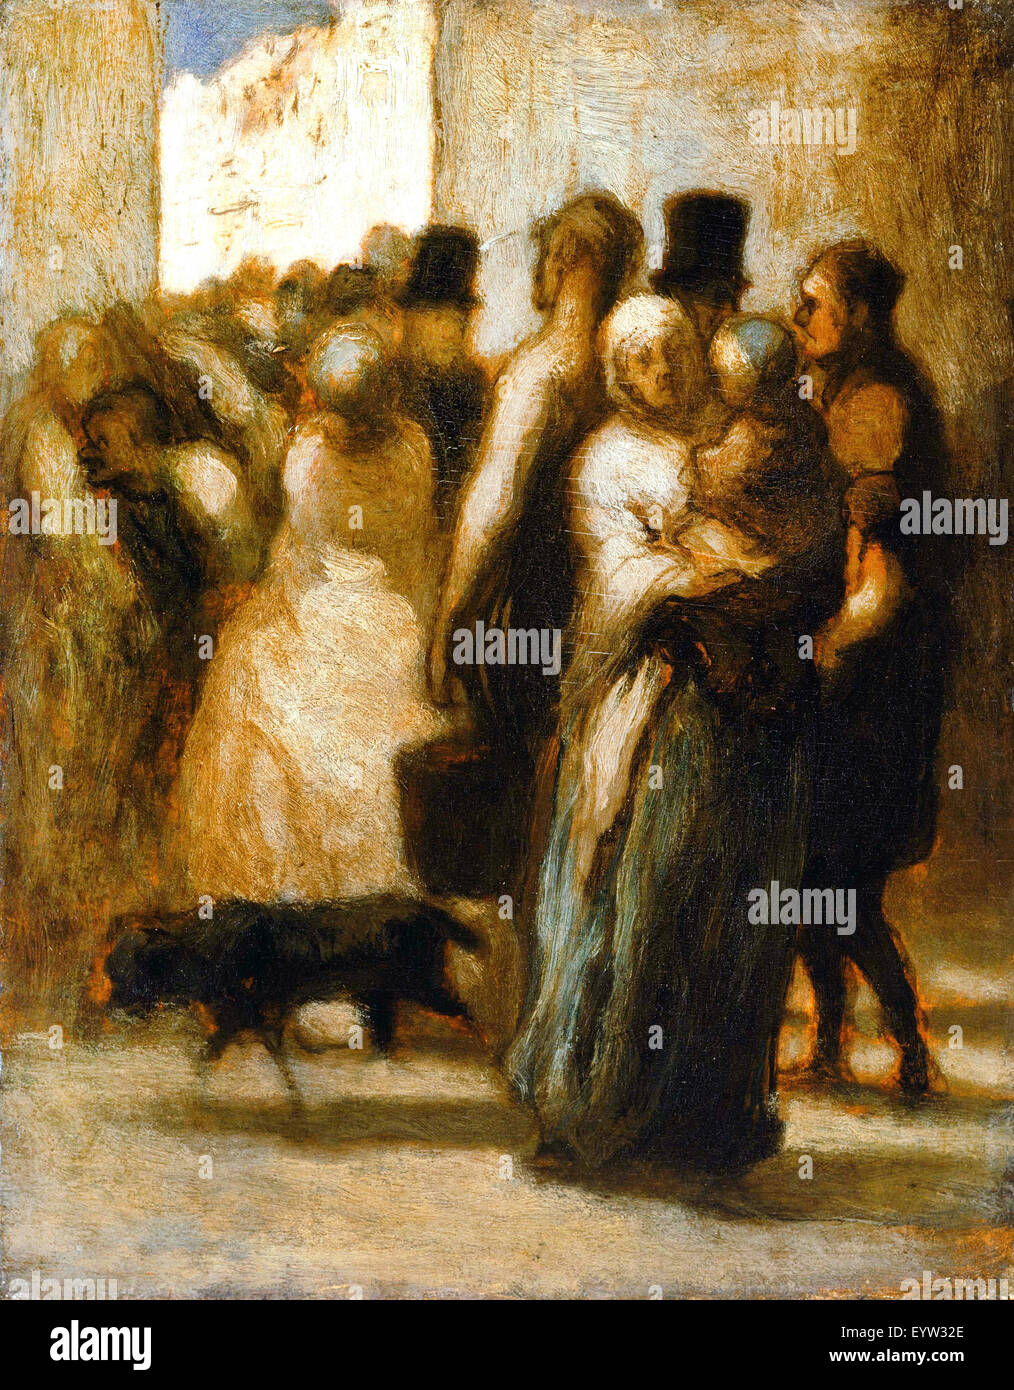 Honore Daumier, To the Street 1840-1850 Öl auf Holz. Die Phillips Collection, Washington, D.C., USA. Stockfoto